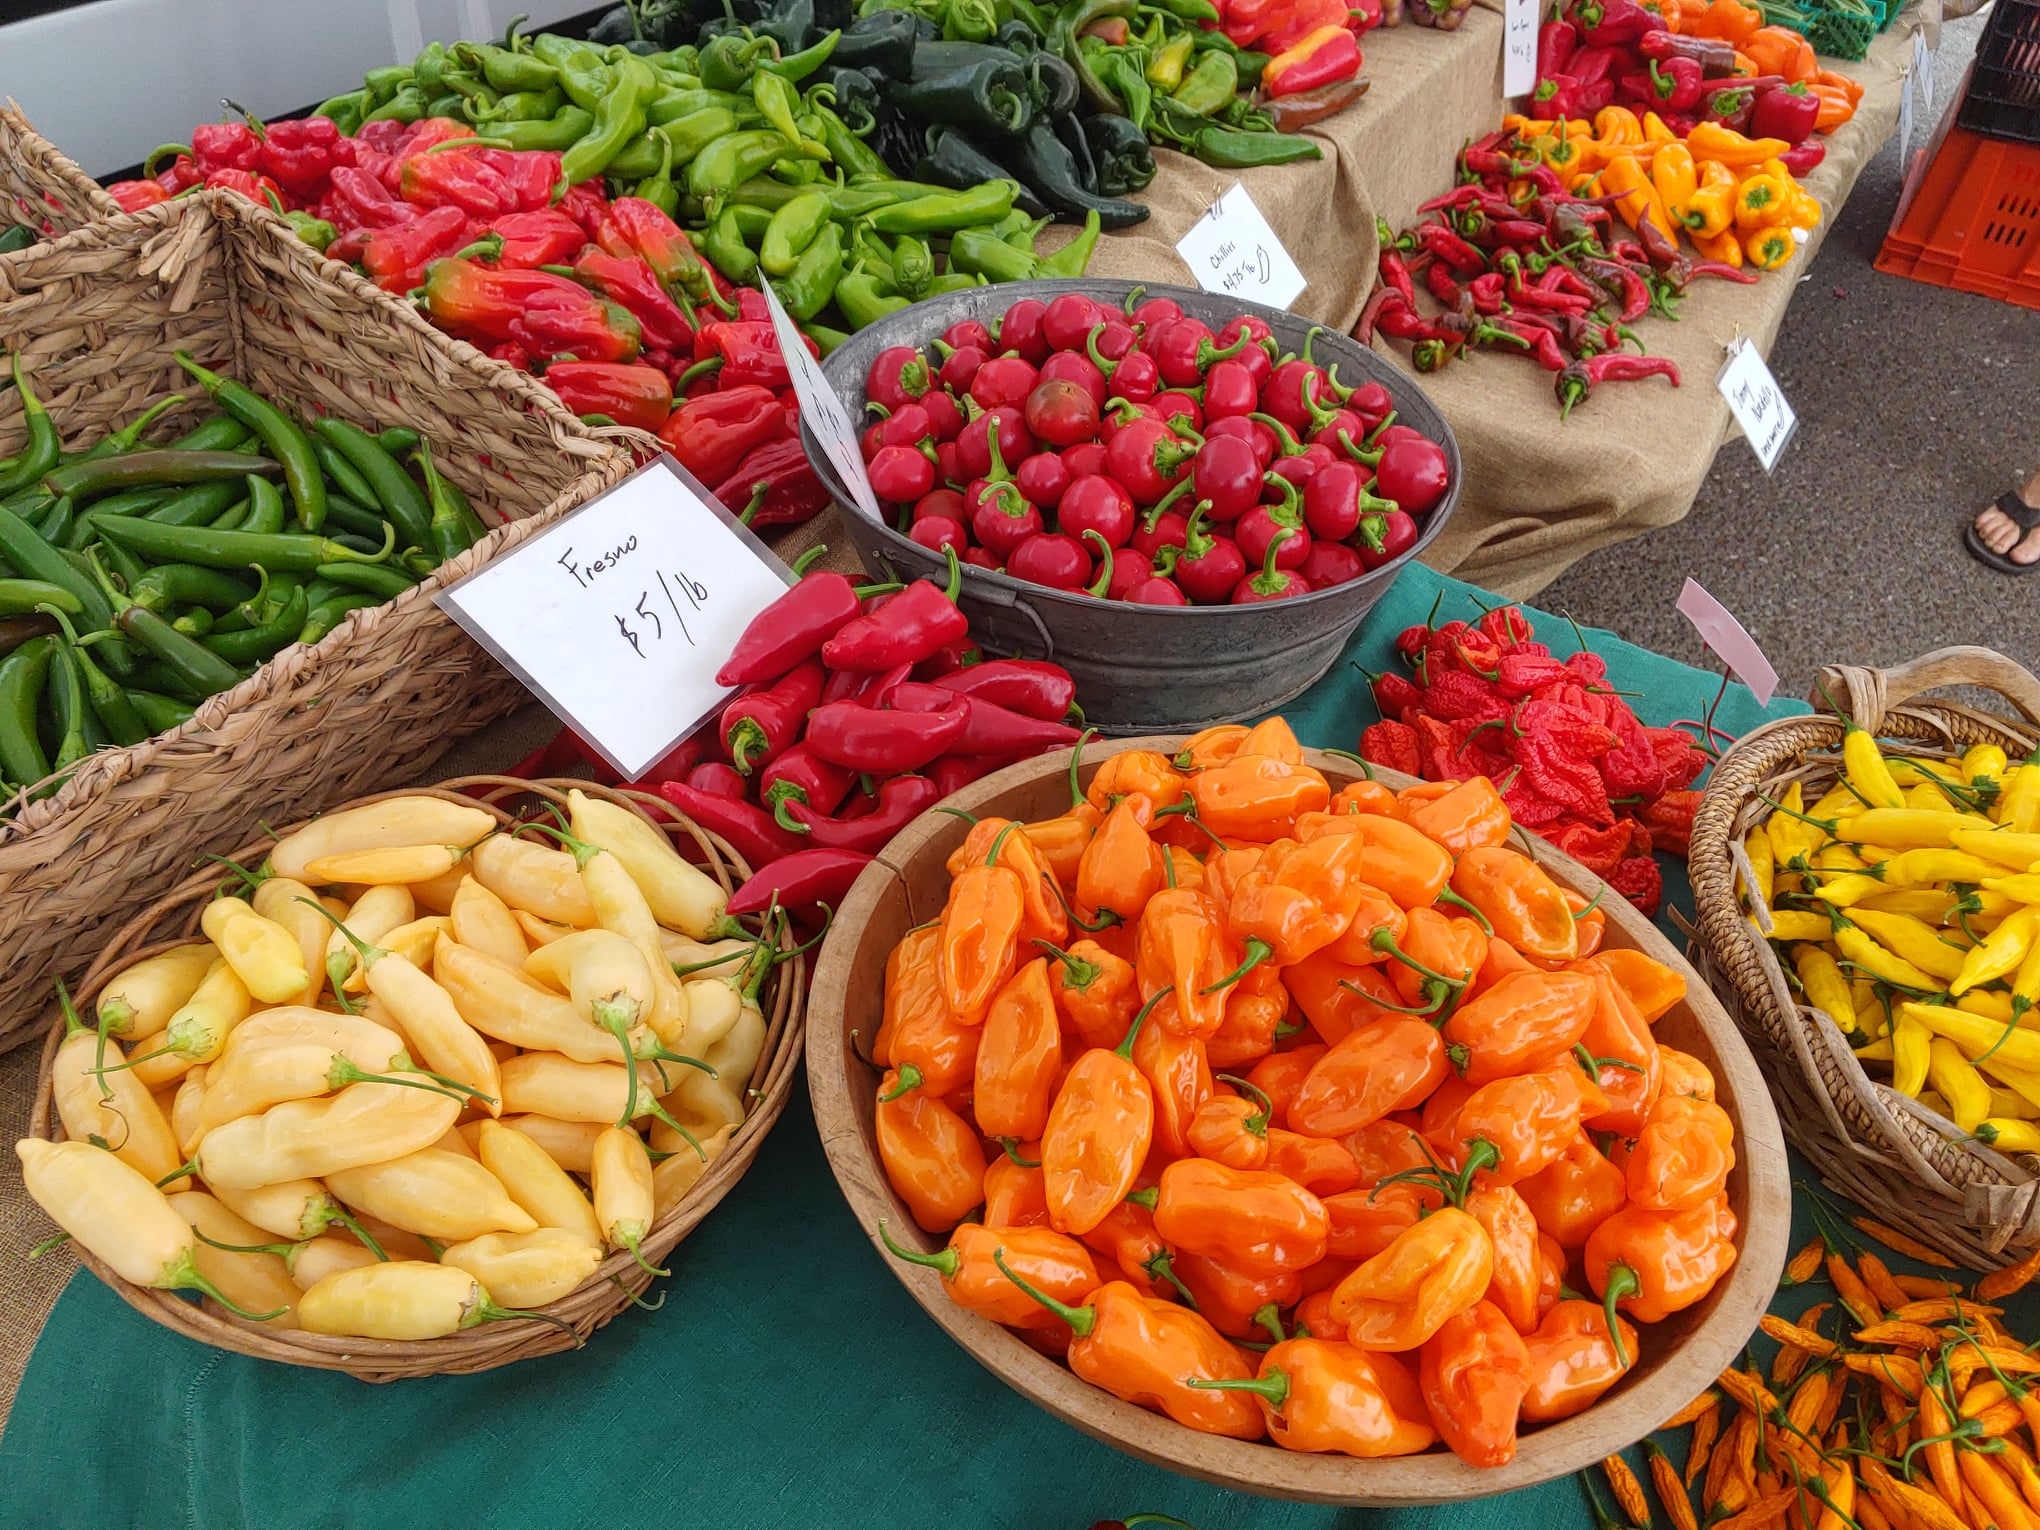 5 Farmers Markets to Visit in San Francisco